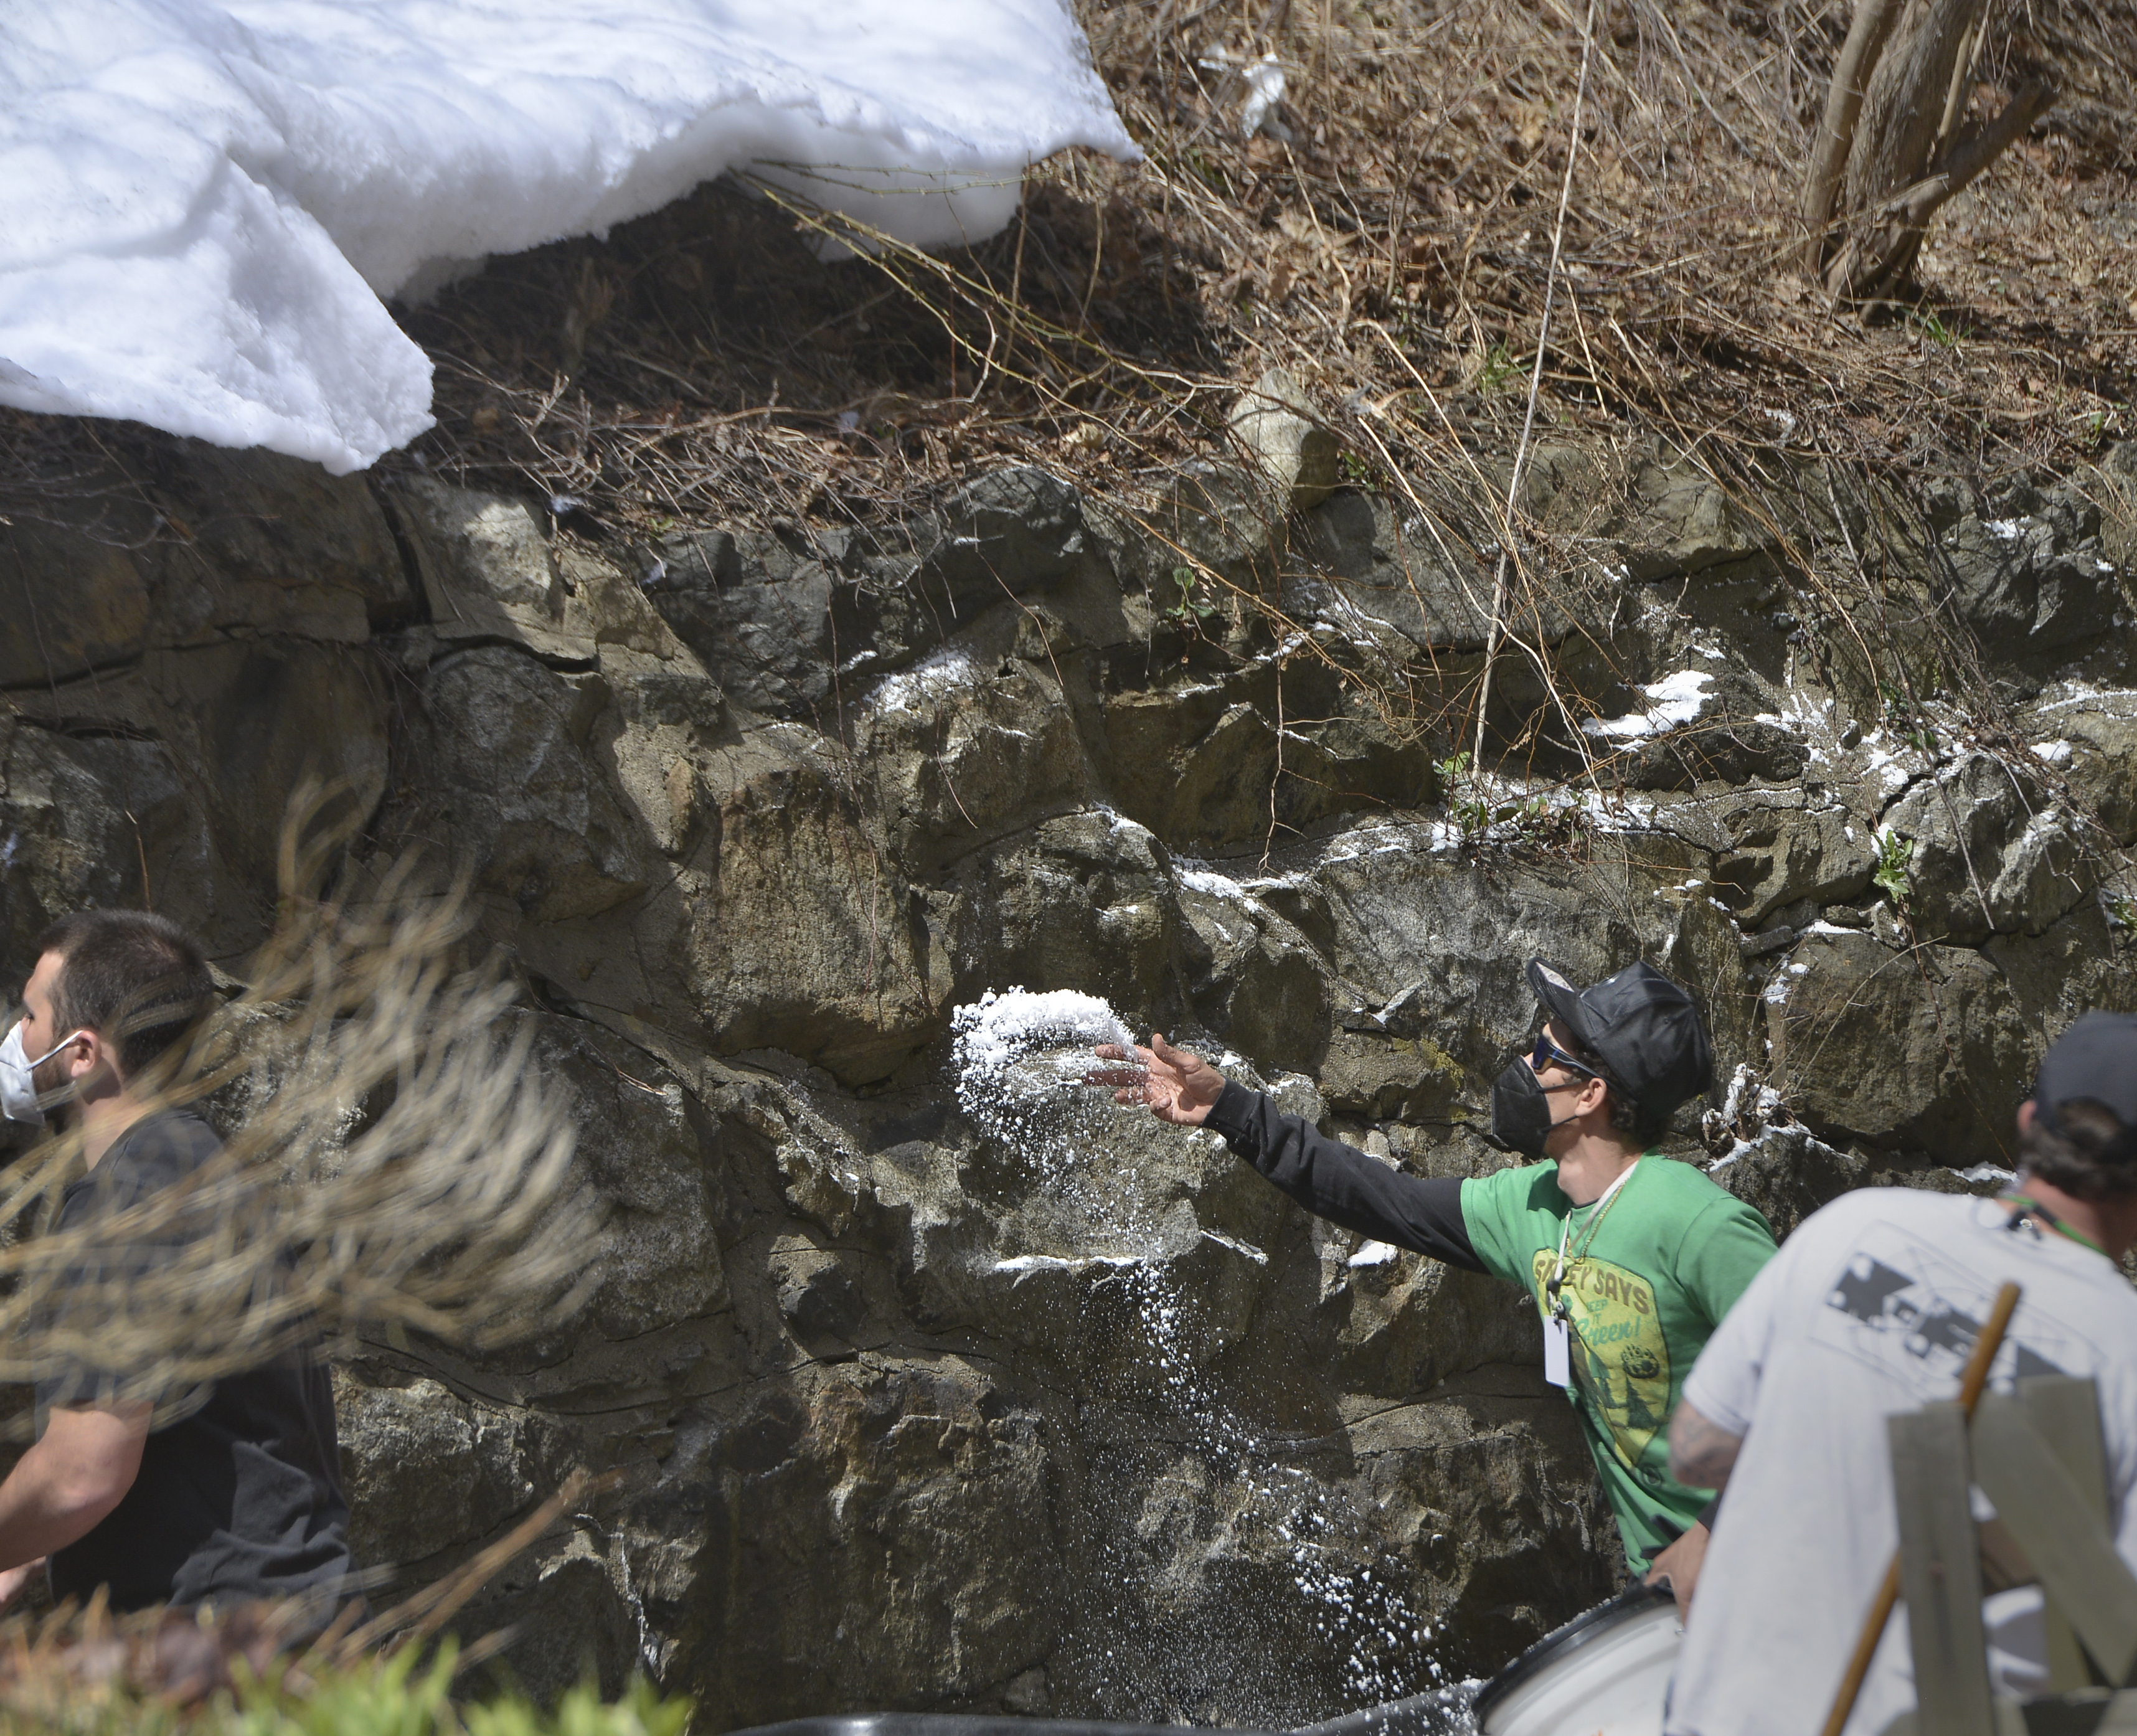 Fake snow is tossed onto what will be the backround for a scene in the show Dexter, now being filmed in downtown Shelburne Falls, April 7, 2021.  (Don Treeger / The Republican)